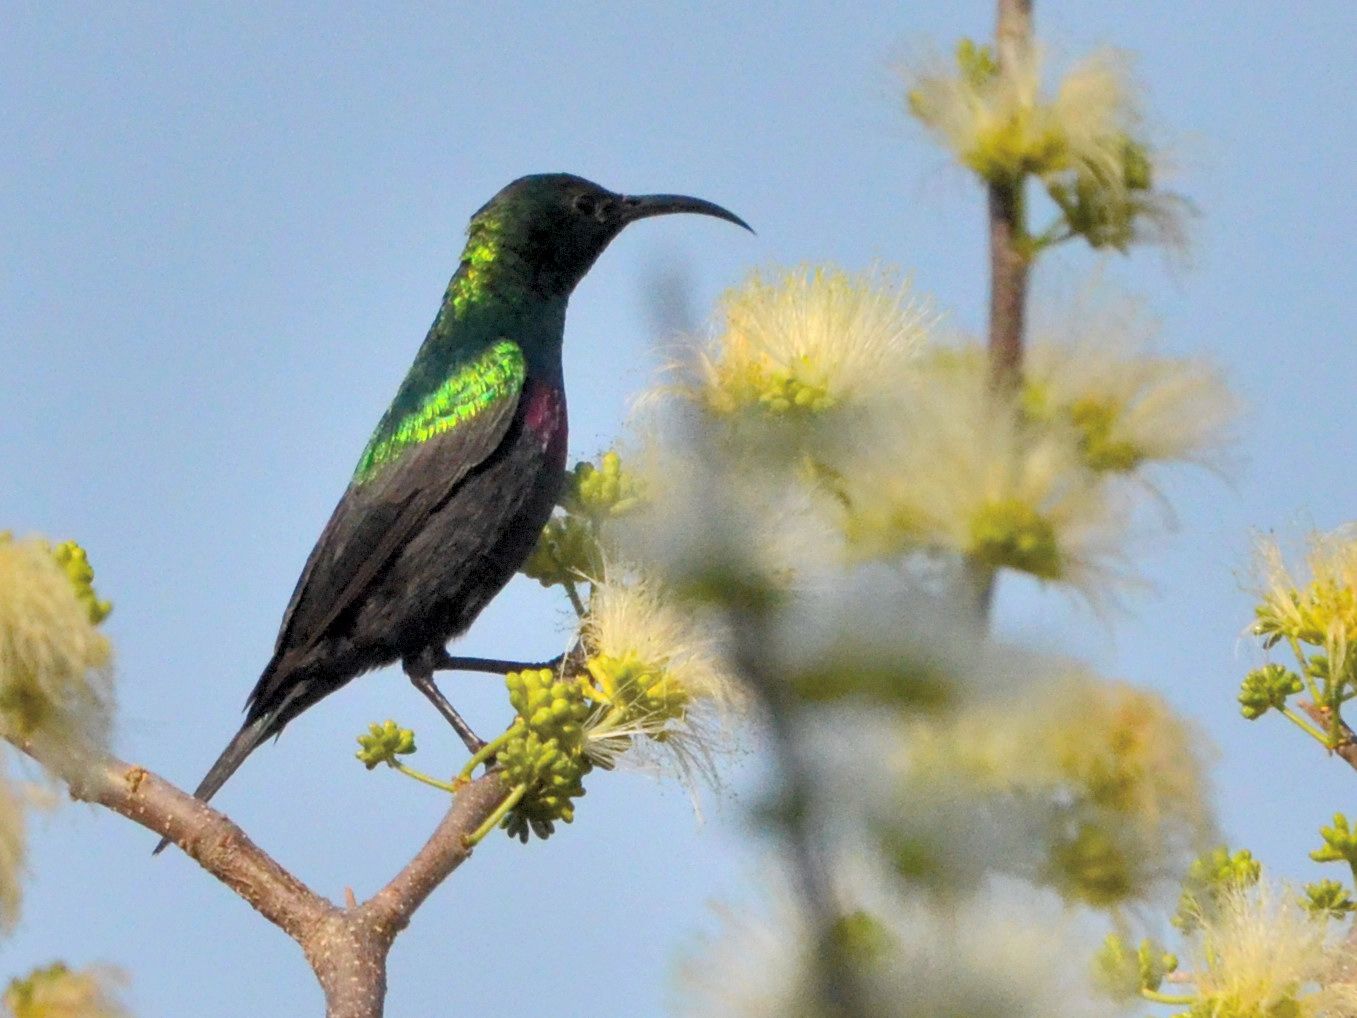 Click picture to see more Marico Sunbirds.